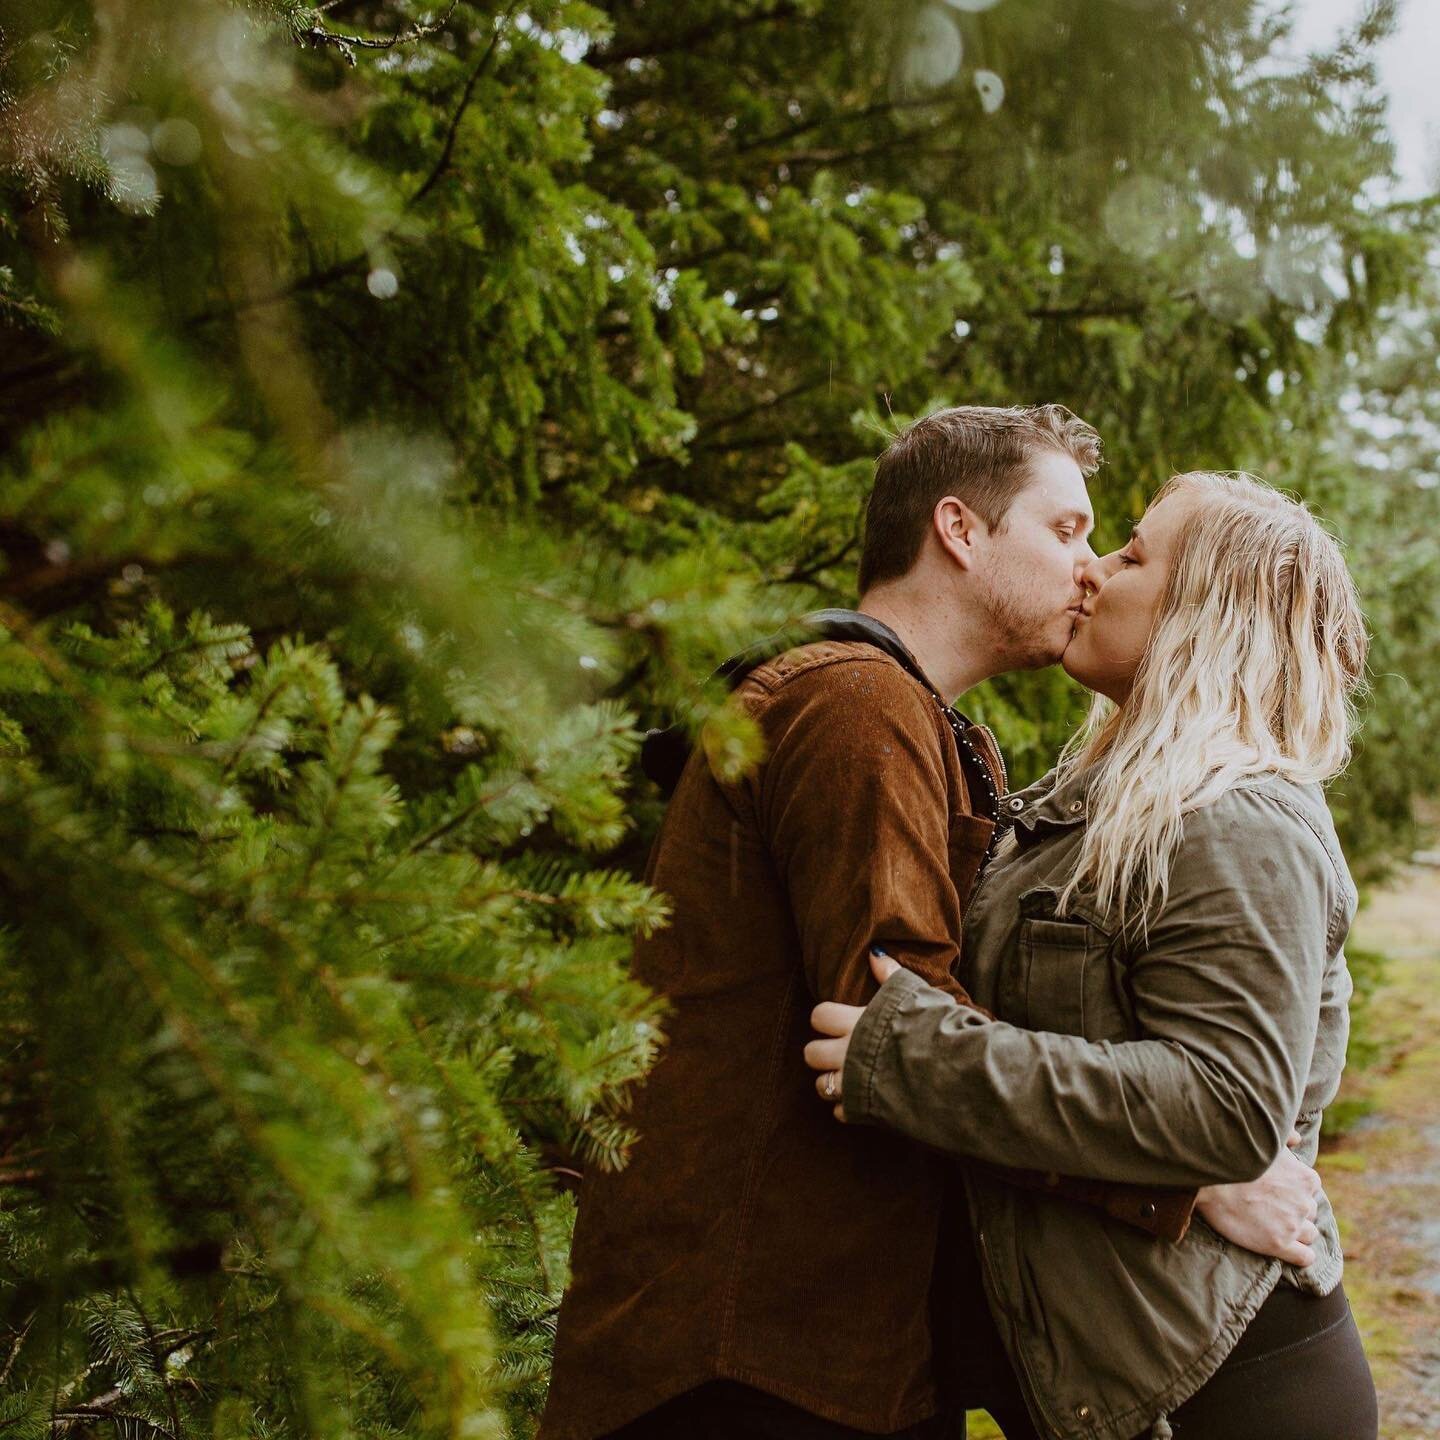 So sad this session got deleted off of my Instagram, so I&rsquo;m posting it again! 

Meeting &amp; working with Sam + Jacob was seriously so much fun. They&rsquo;re troopers in the rain and this is by far my FAVORITE rainy day engagement session, ev